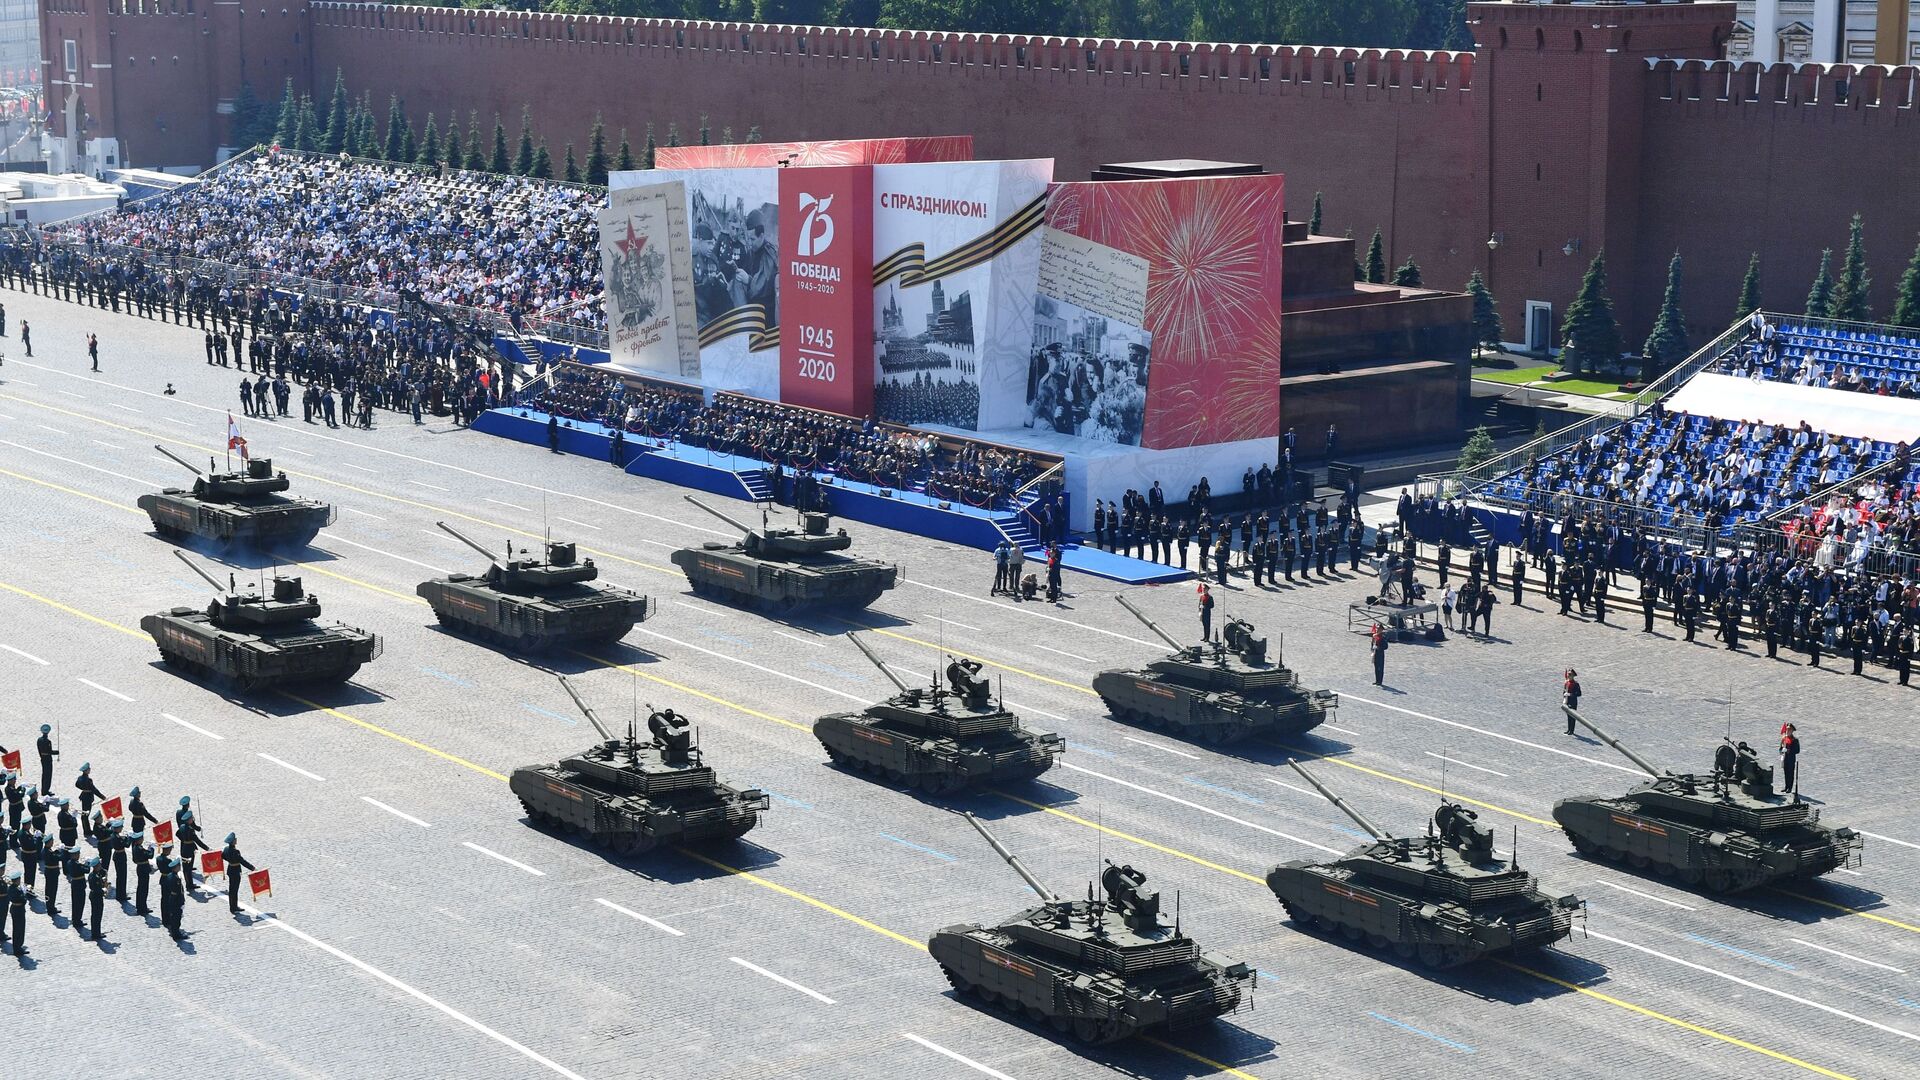 T-14 Armata and T-90M tanks during the June 24, 2020 parade dedicated to Victory in the Great Patriotic War of 1941-1945 on Red Square. - Sputnik International, 1920, 28.12.2021